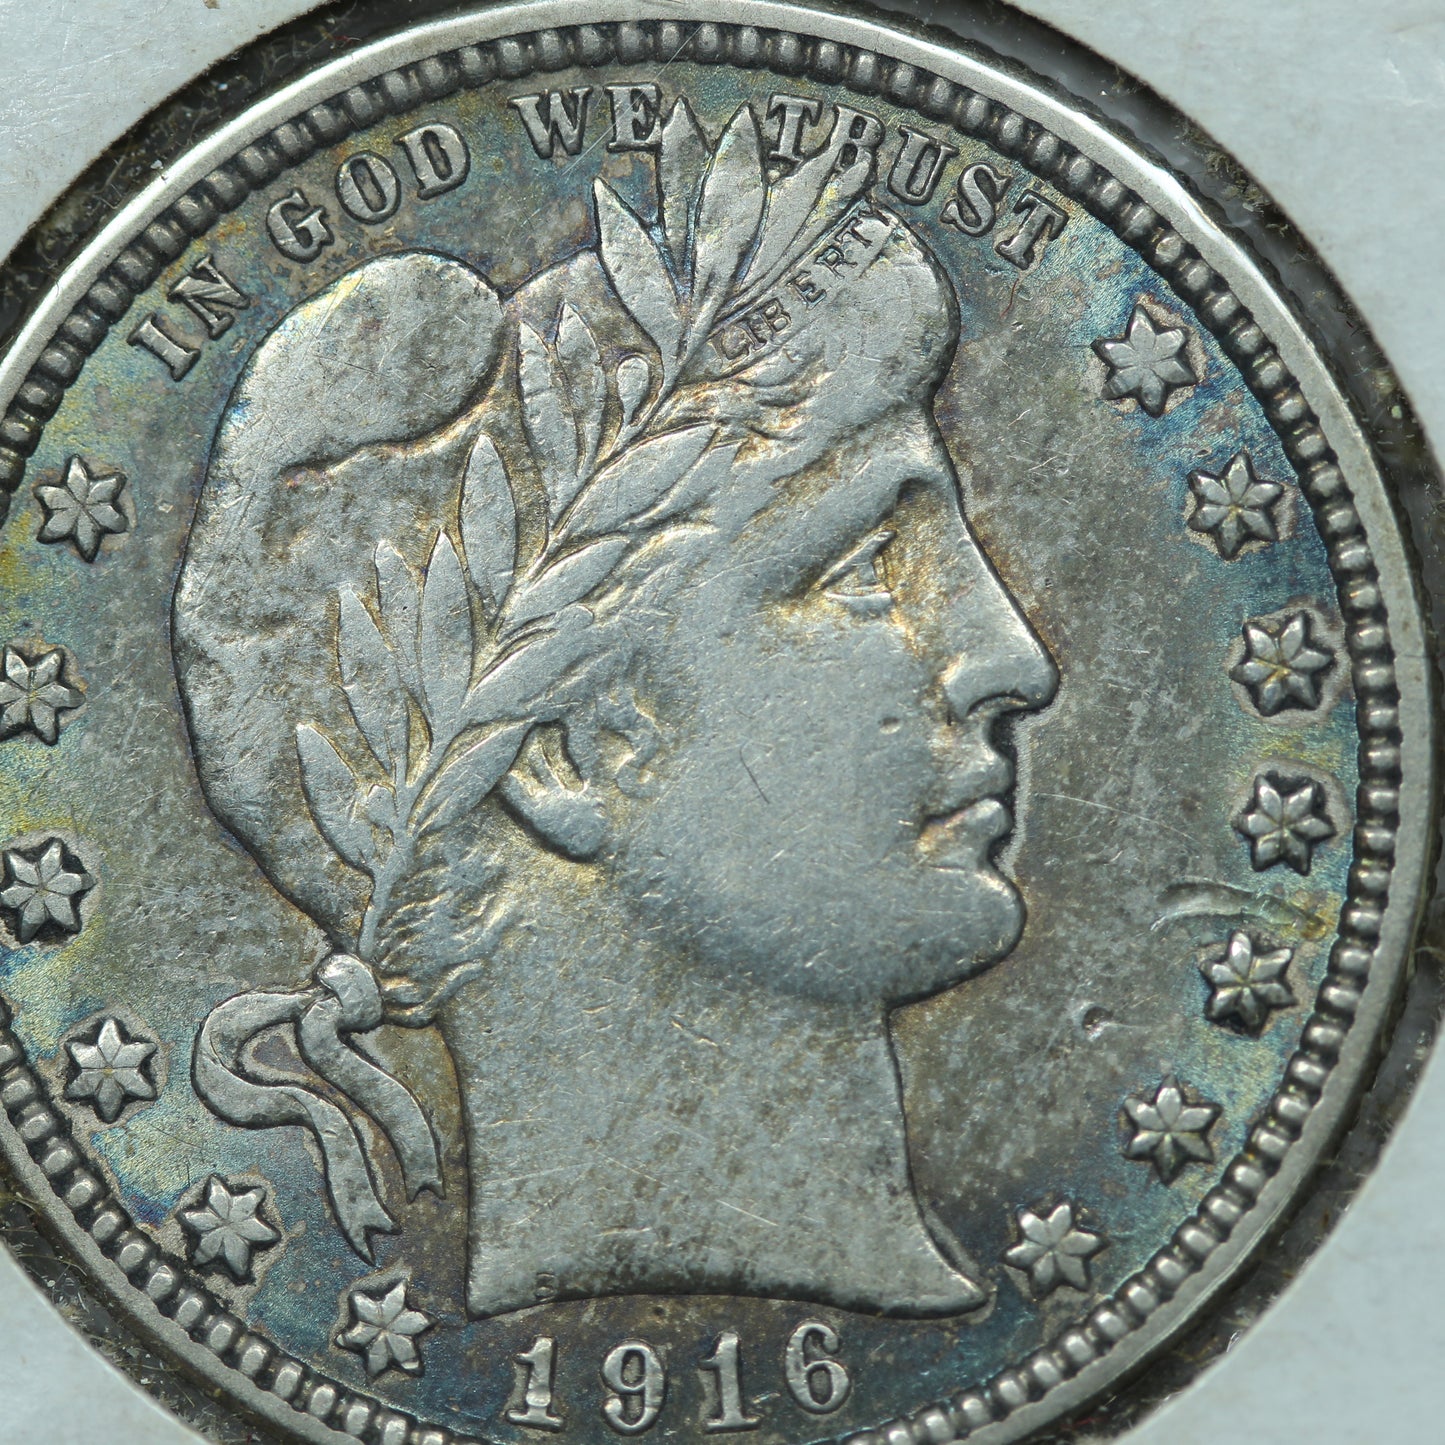 1916 (Philadelphia) Barber Silver Quarter 25c - Great Condition with Some Toning